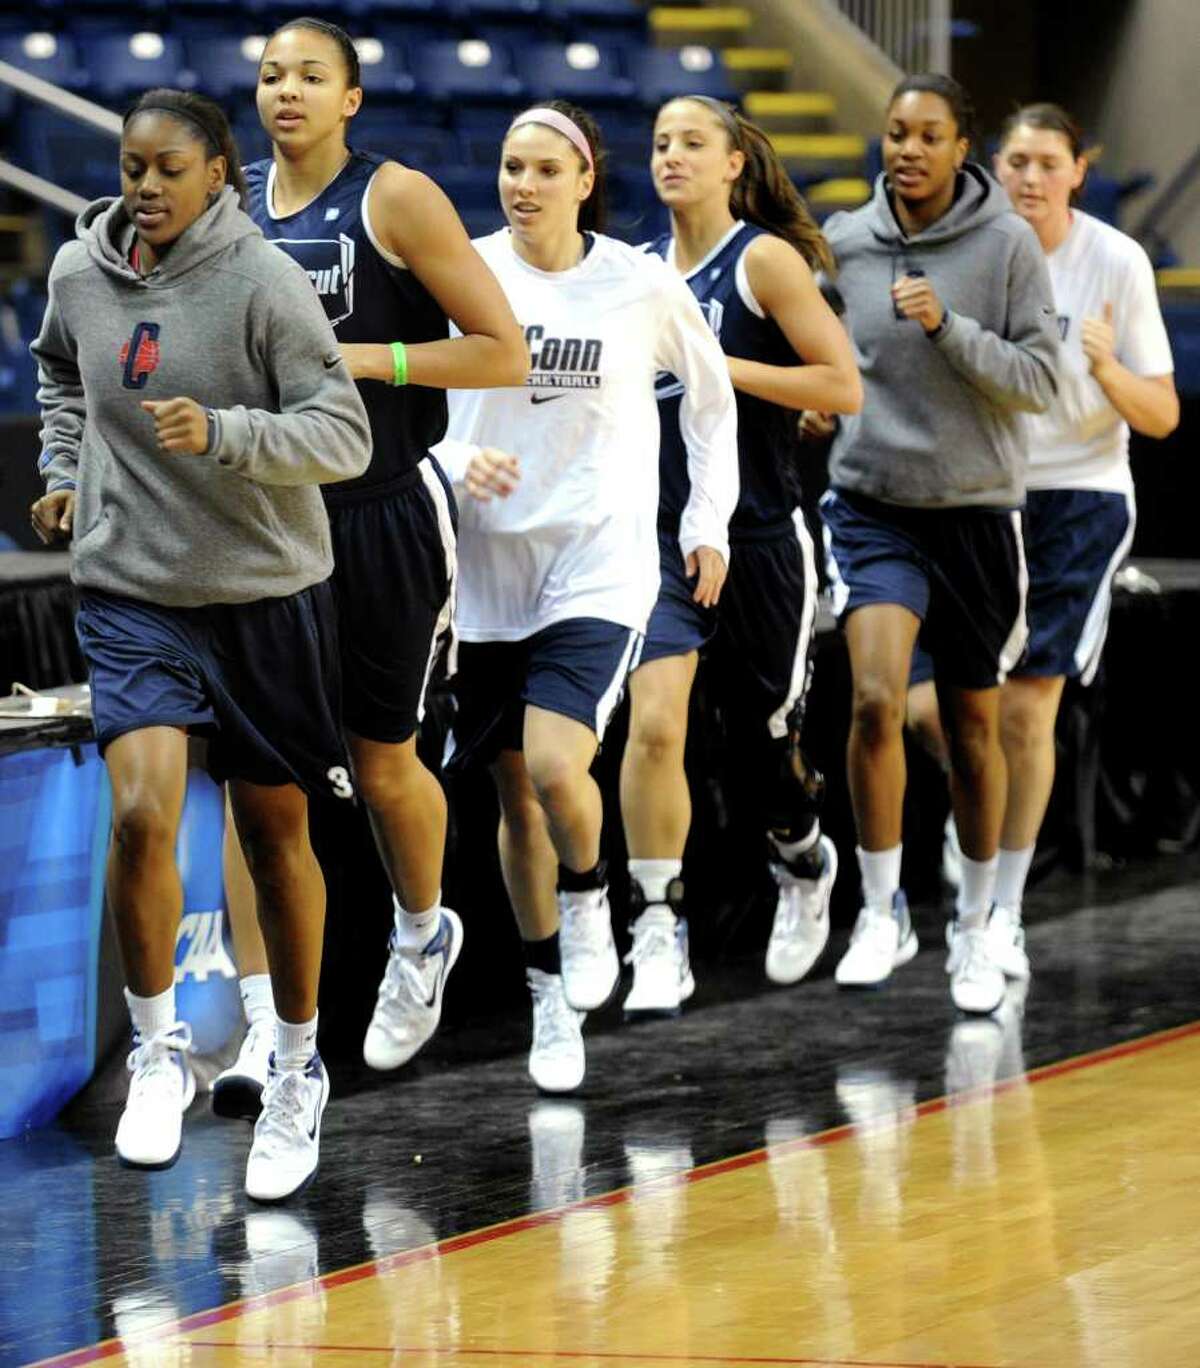 Tiffany Hayes leads the University of Connecticut women's basketball team as they run laps prior to practice Friday, March 16th, 2012 at the Webster Bank Arena, in Bridgeport, Conn. Connecticut will play Prairie View A&M in the first round of the NCAA womenâÄôs basketball tournament on Saturday.